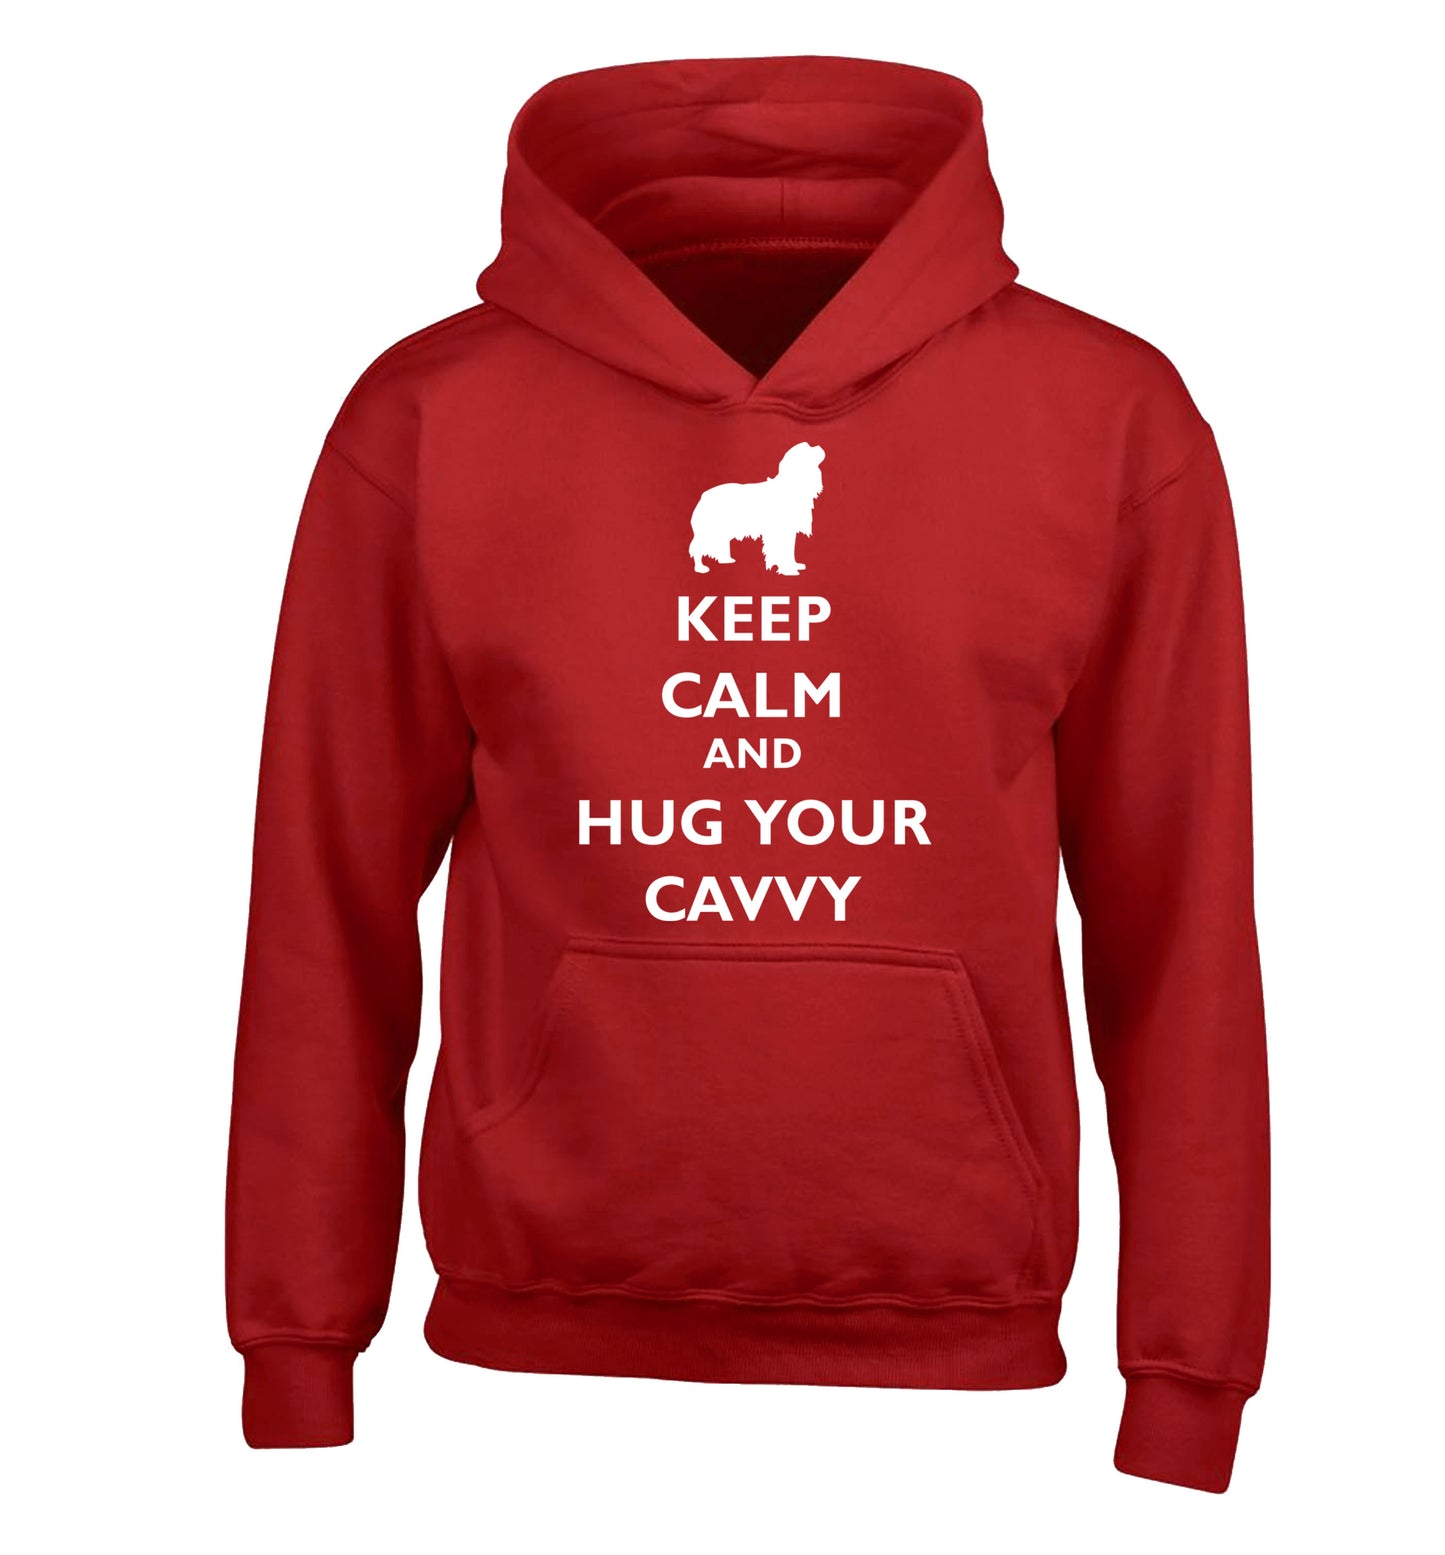 Keep calm and hug your cavvy children's red hoodie 12-13 Years